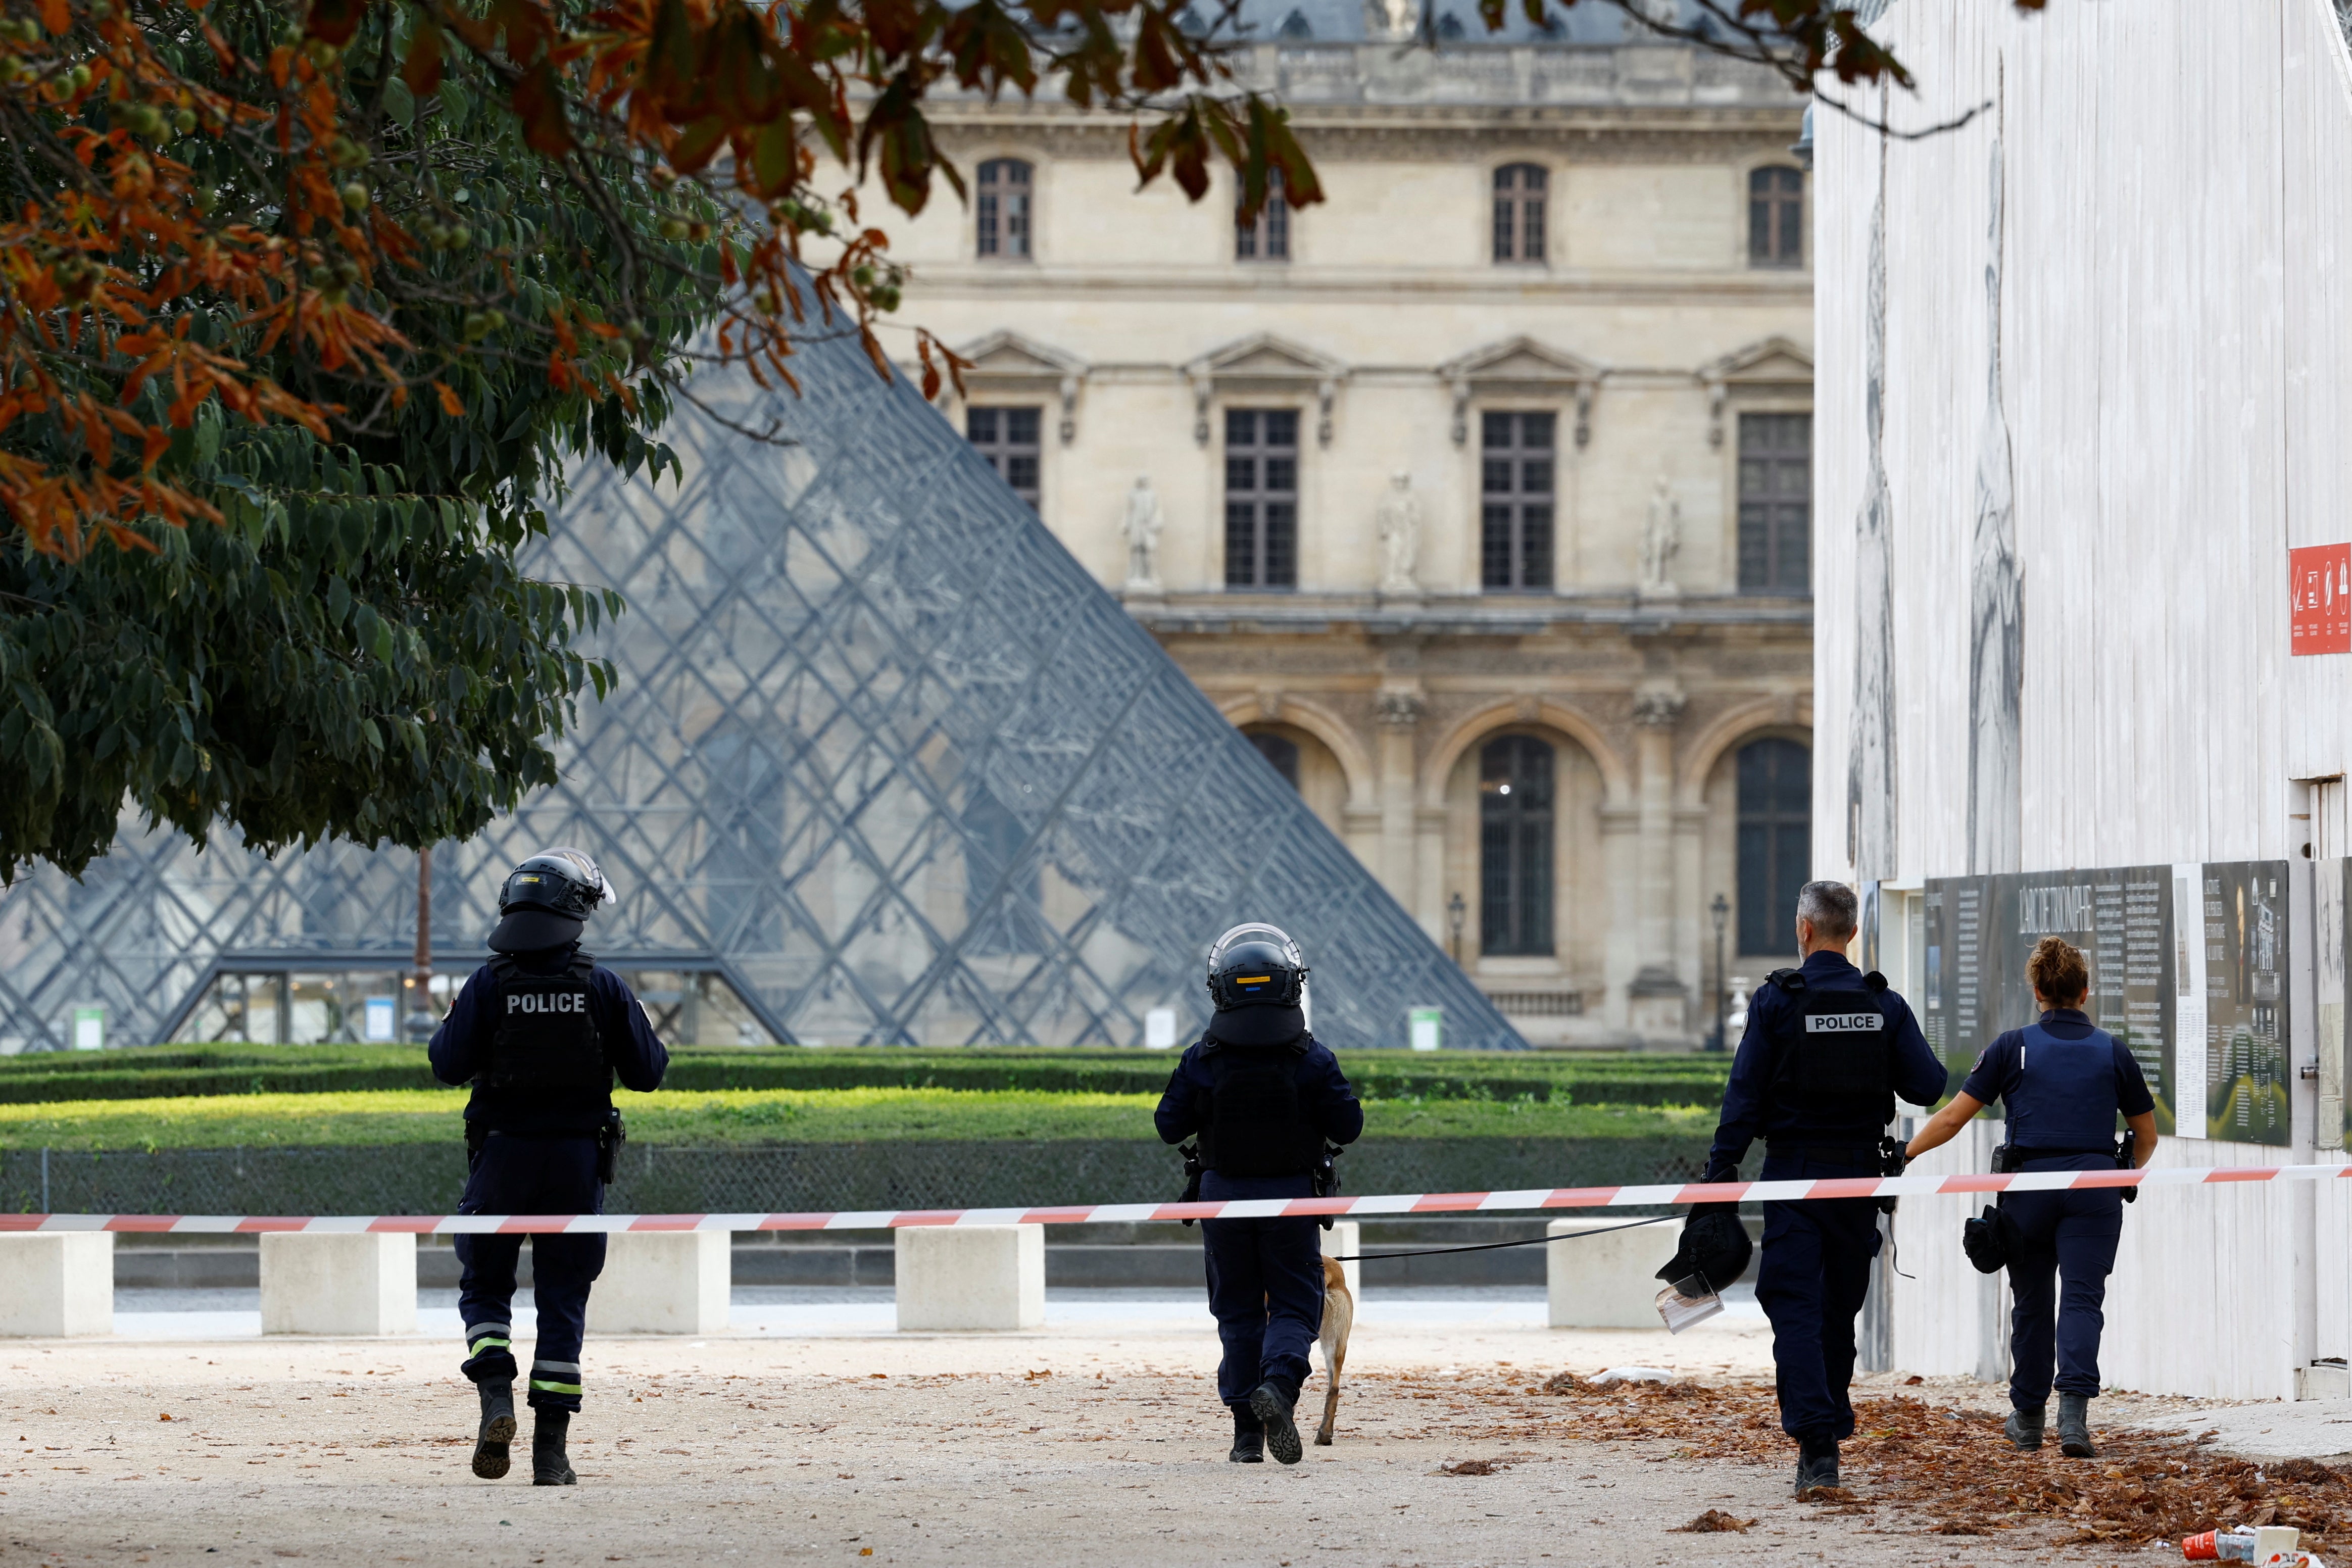 Police patrol in front of the Louvre museum on Saturday